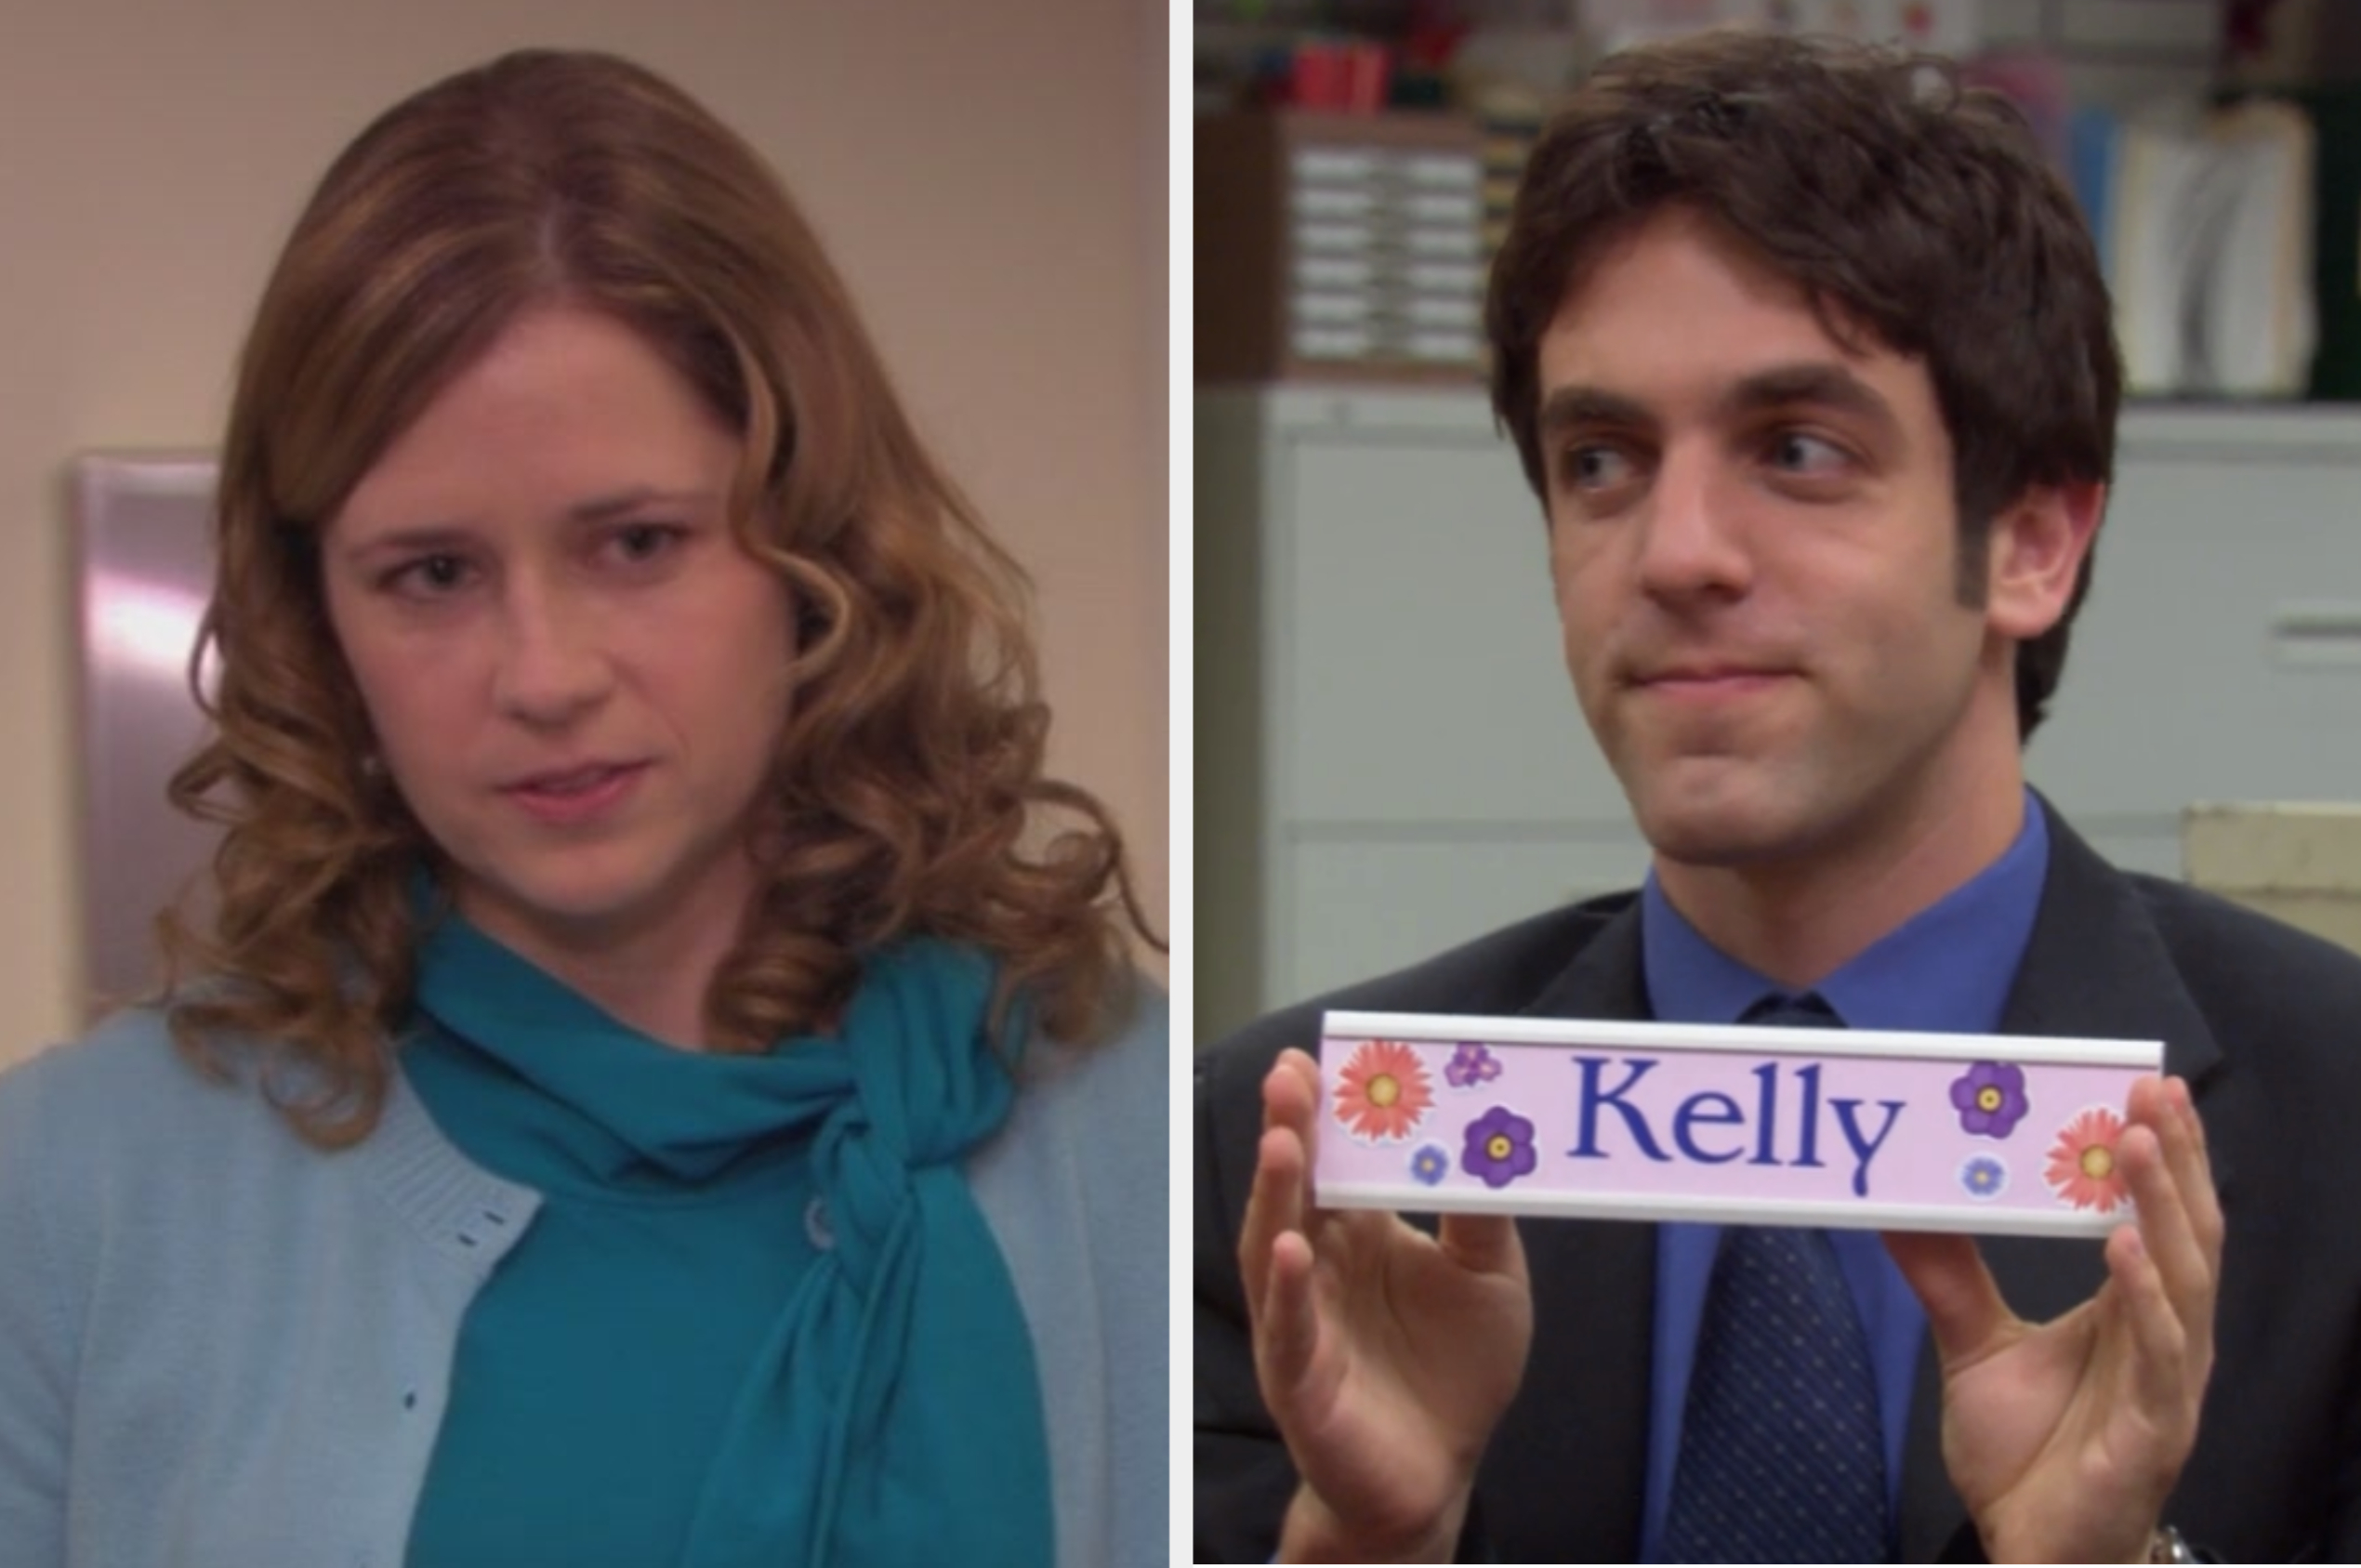 The Office Fans Will Want to Check Out This Unique Overnight Experience